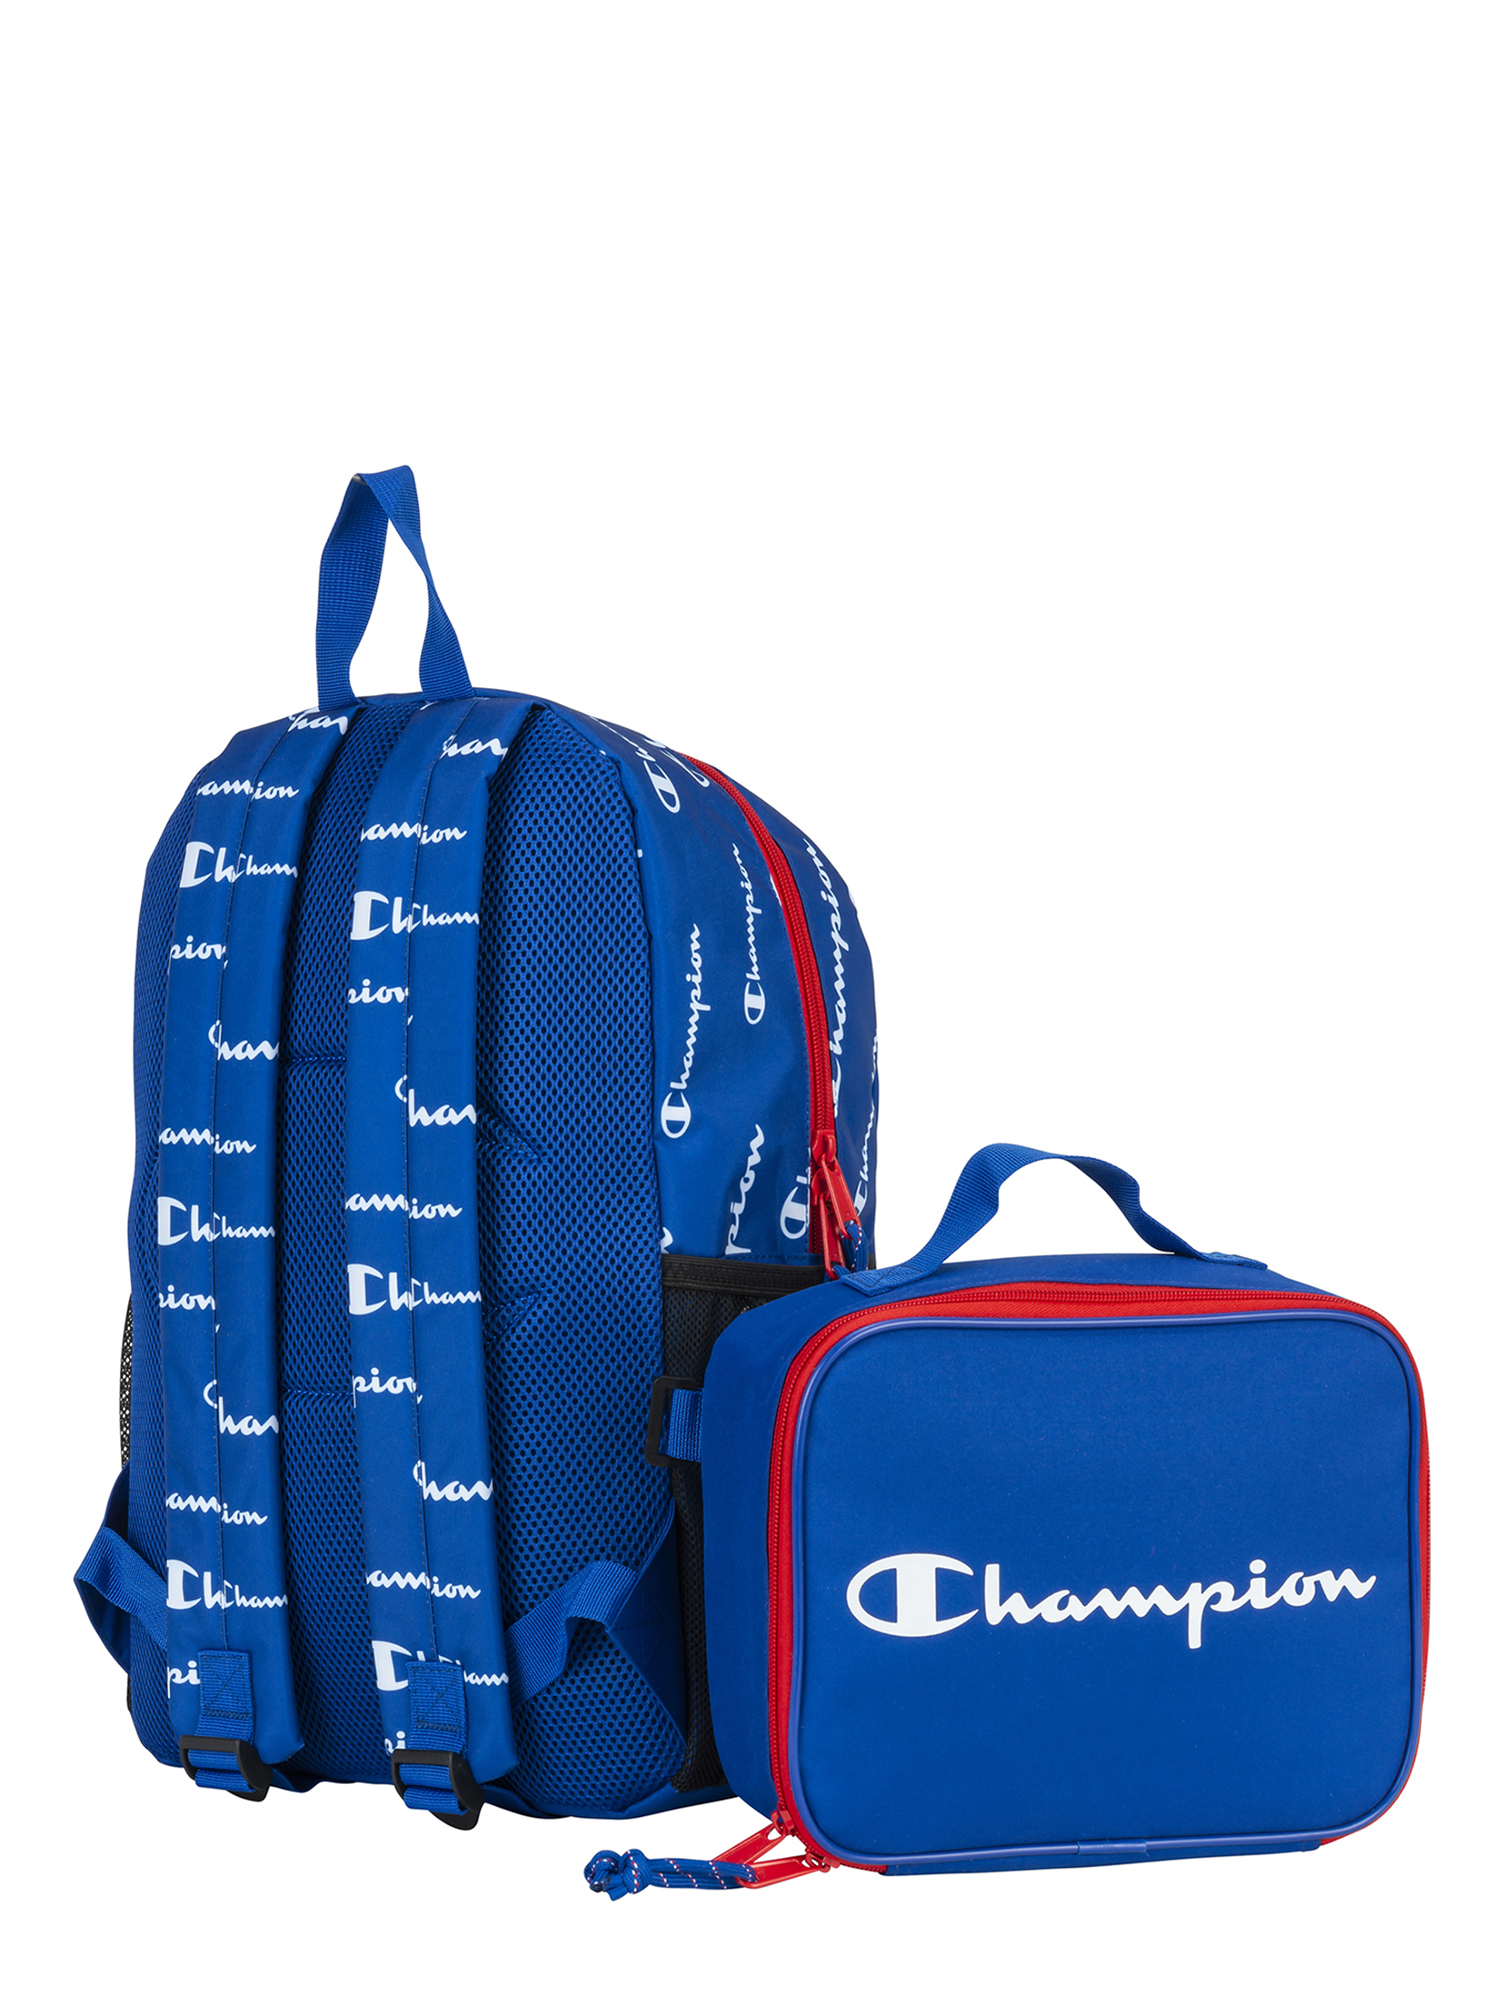 Champion Youth Backpack with Lunch Bag - image 4 of 4